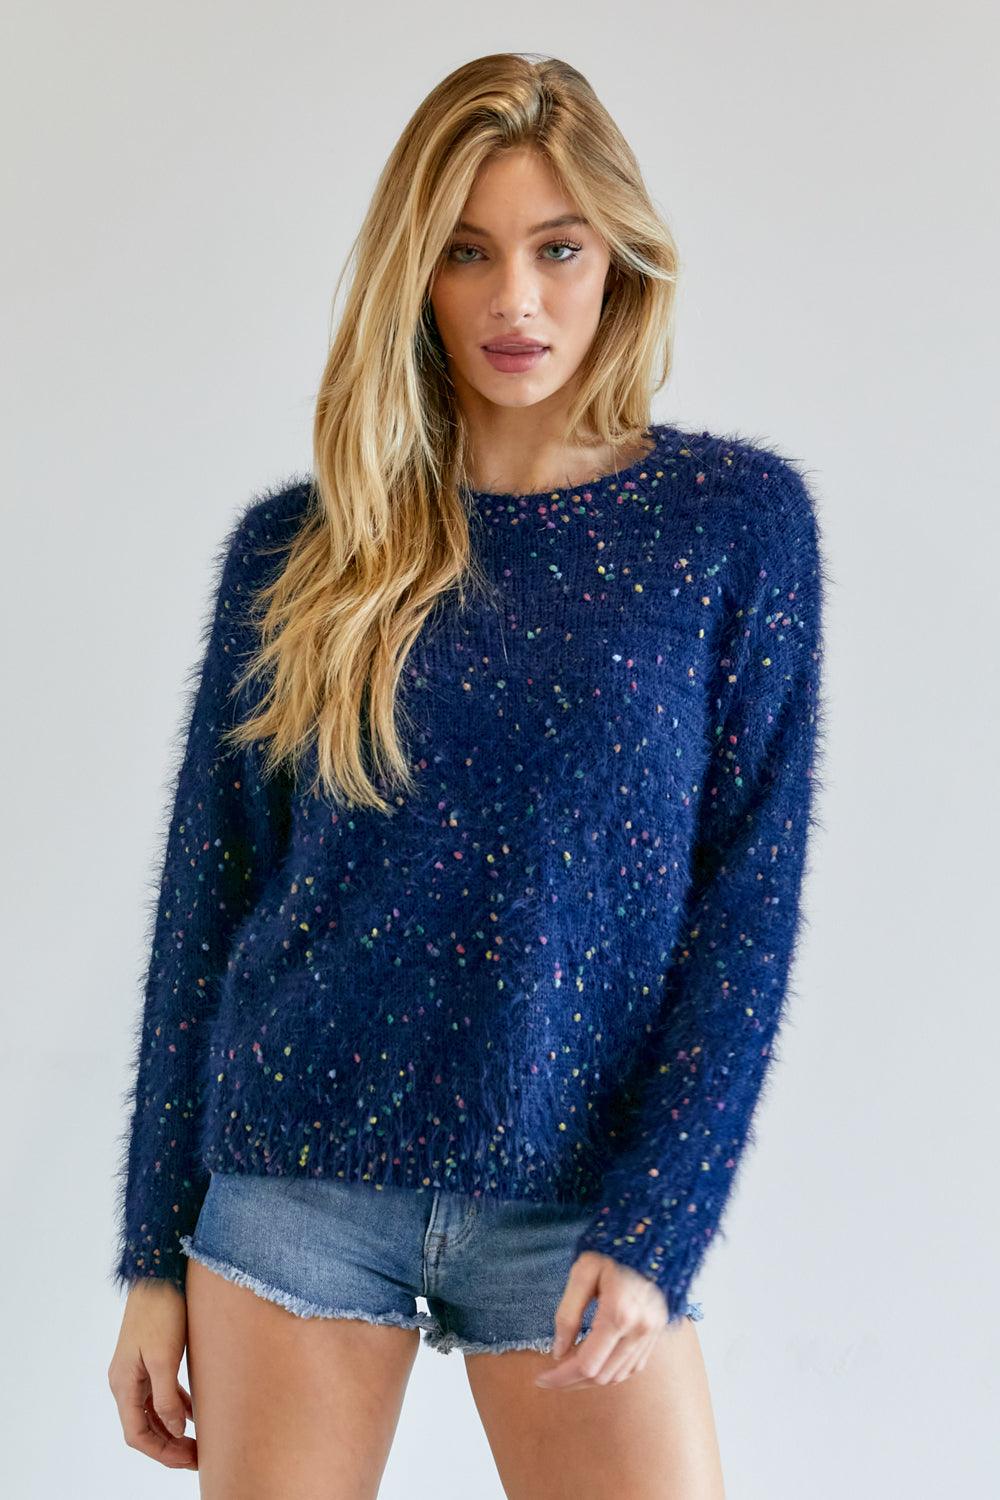 Buying Guide: Stylish and Healthy Dresses 2023 | Fashionably Fit | Cute Multi Color Polak Dot Sweater